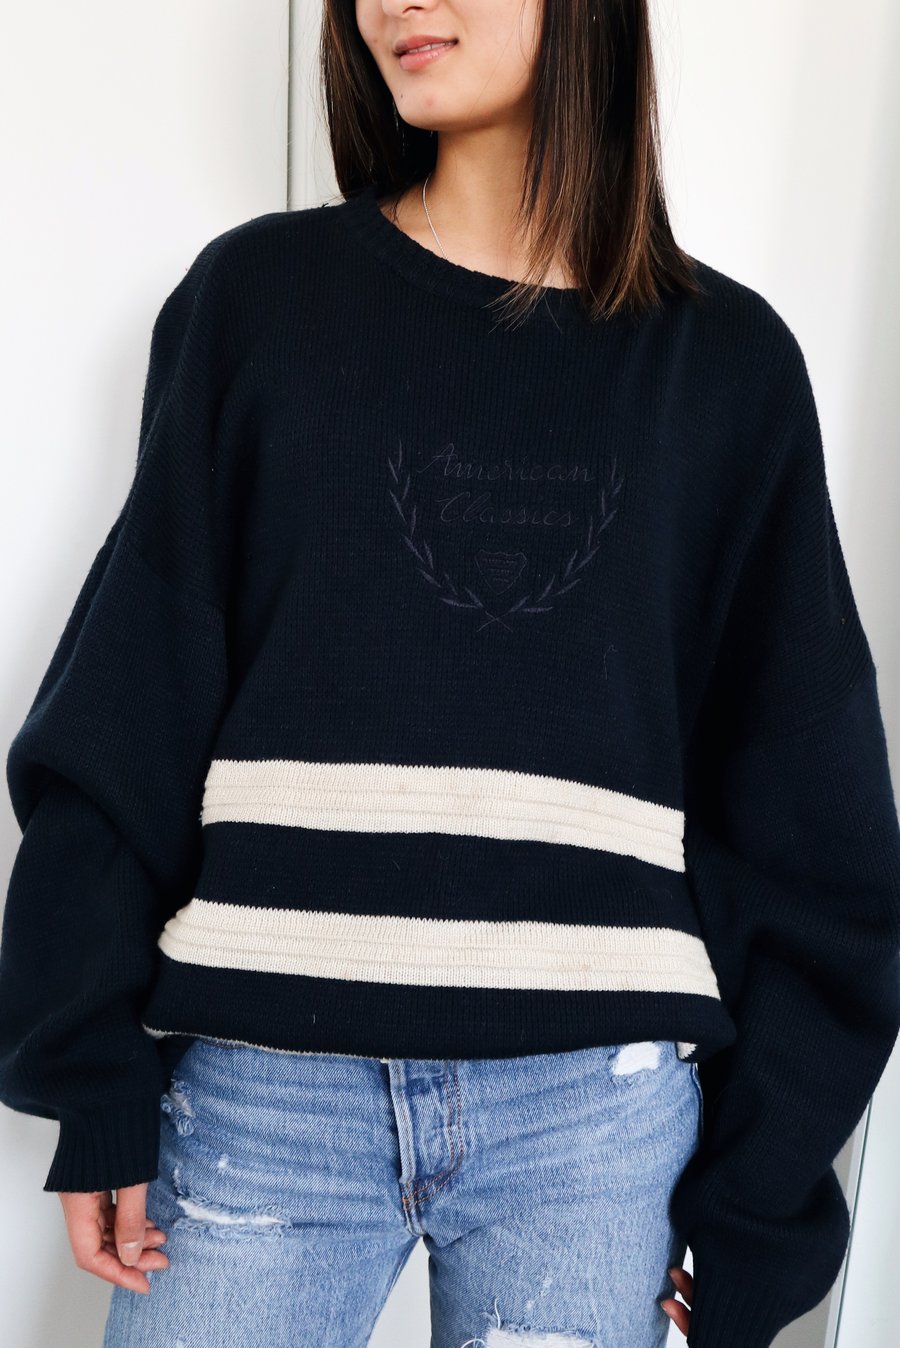 Image of "AMERICAN CLASSIC" VINTAGE SWEATER